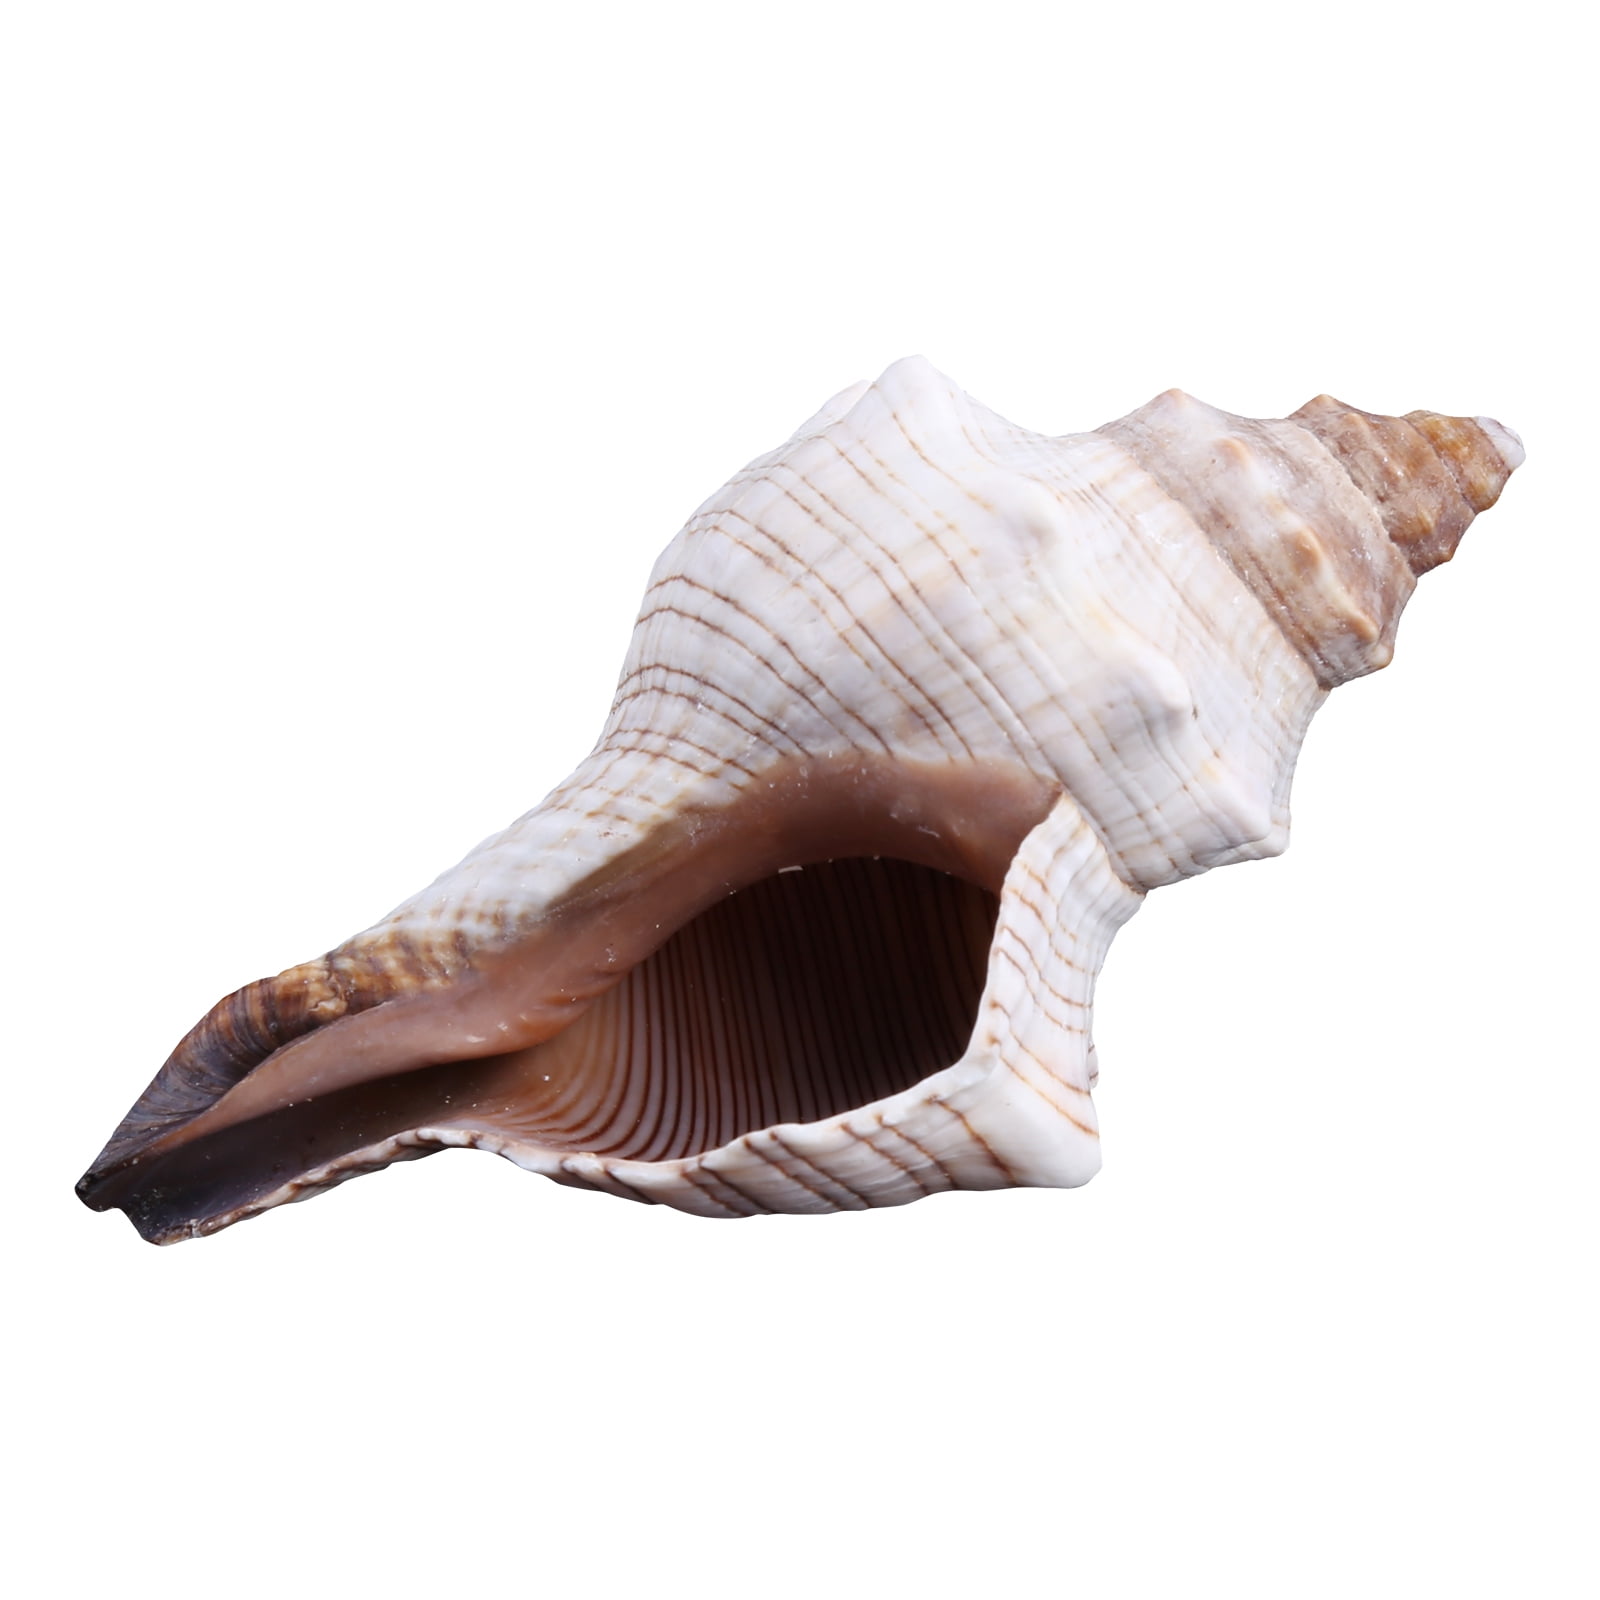 Large Natural Sea Shells, Huge Ocean Conch 15-16 cm Jumbo Seashells Perfect  for Wedding Decor Beach Theme Party, Home Decorations,DIY Crafts, Fish